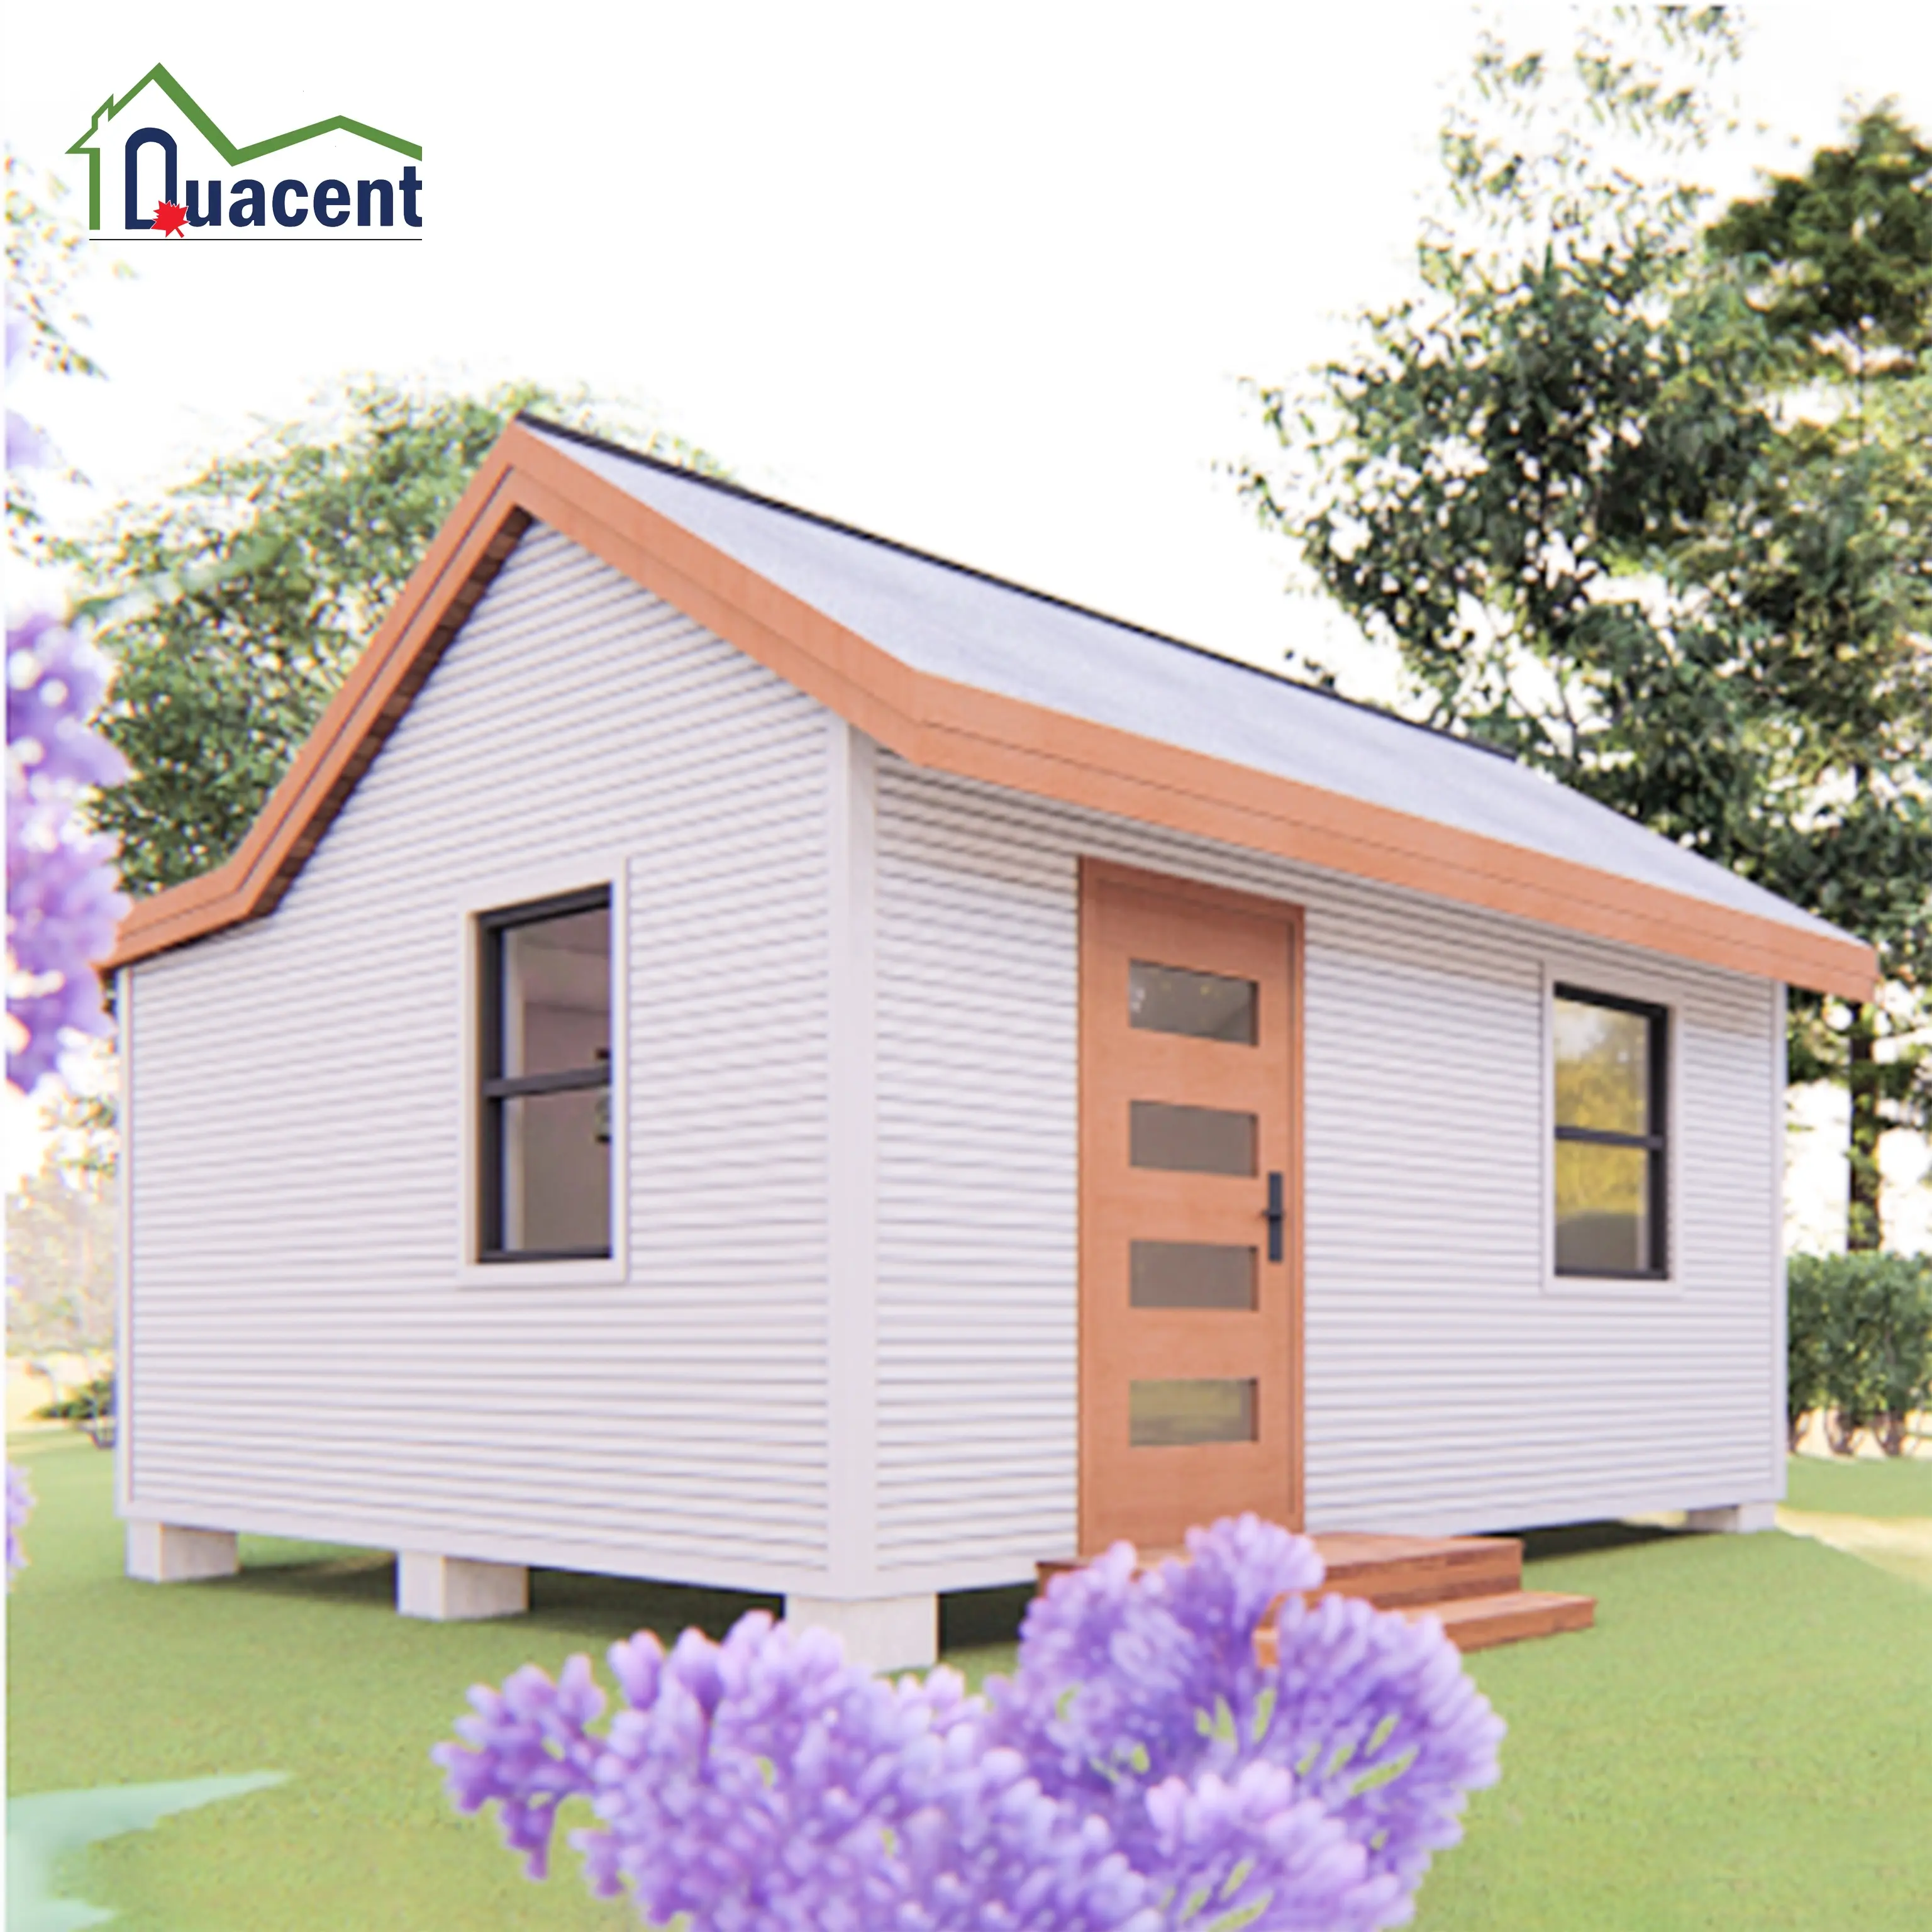 Quacent New Design Fast Building Prefabricated Tiny House Mobile Homes Foldable Office